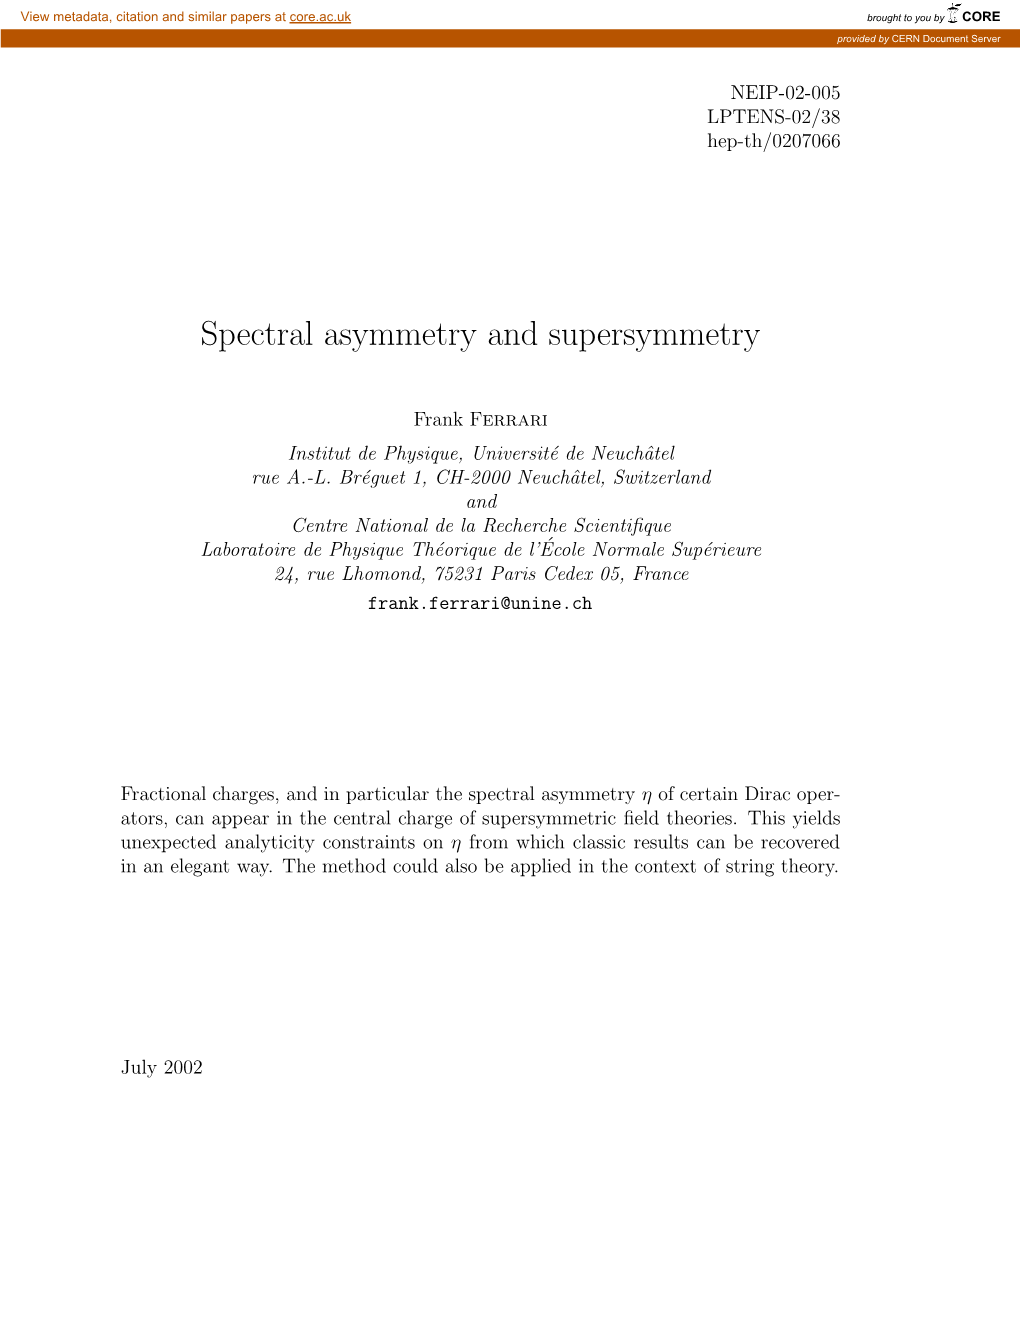 Spectral Asymmetry and Supersymmetry